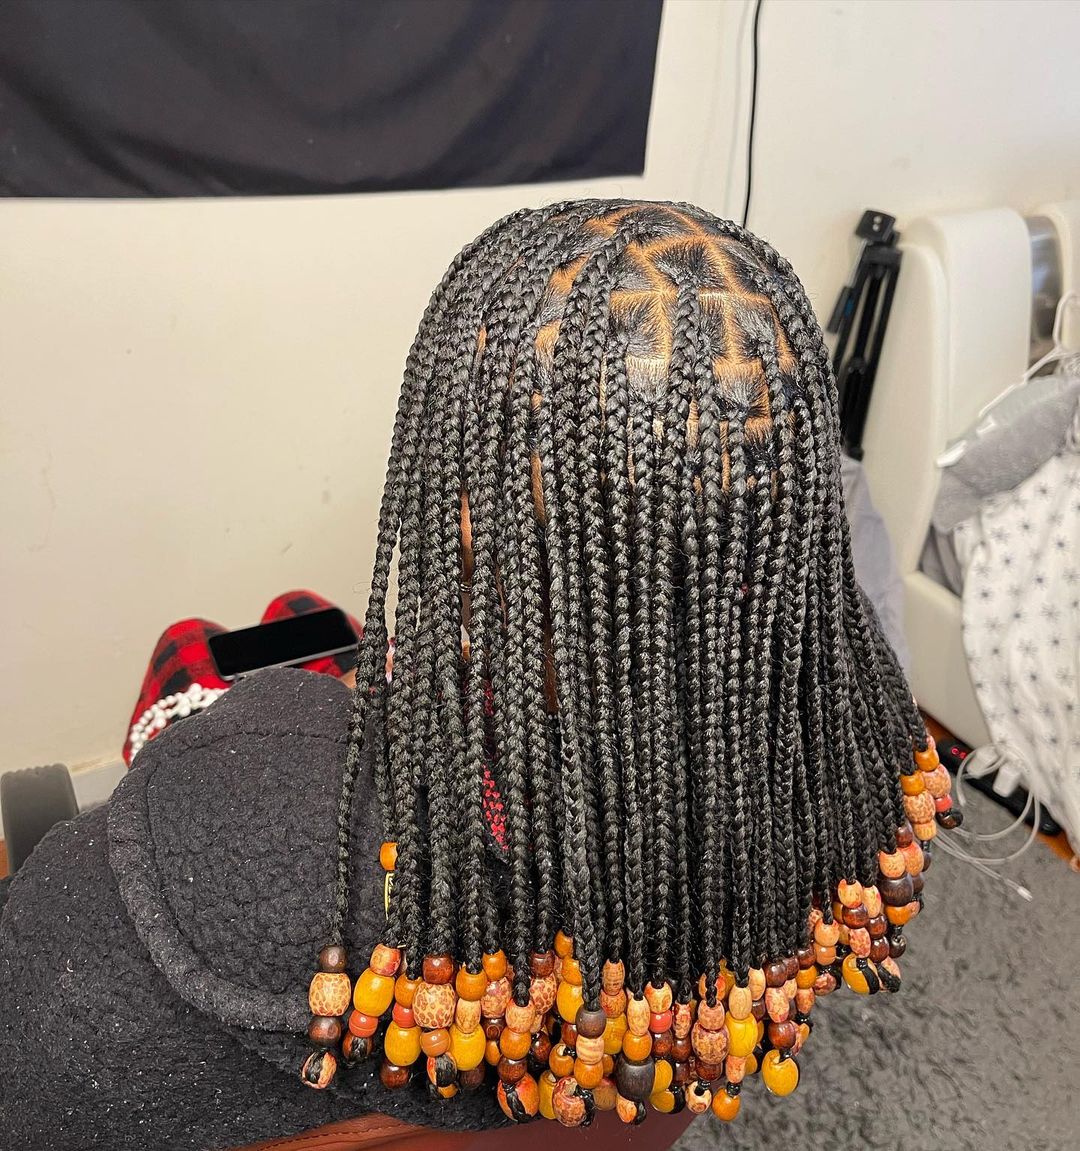 34. Shoulder Length Full Black Knotless Braids With Yellow Cultural Beads